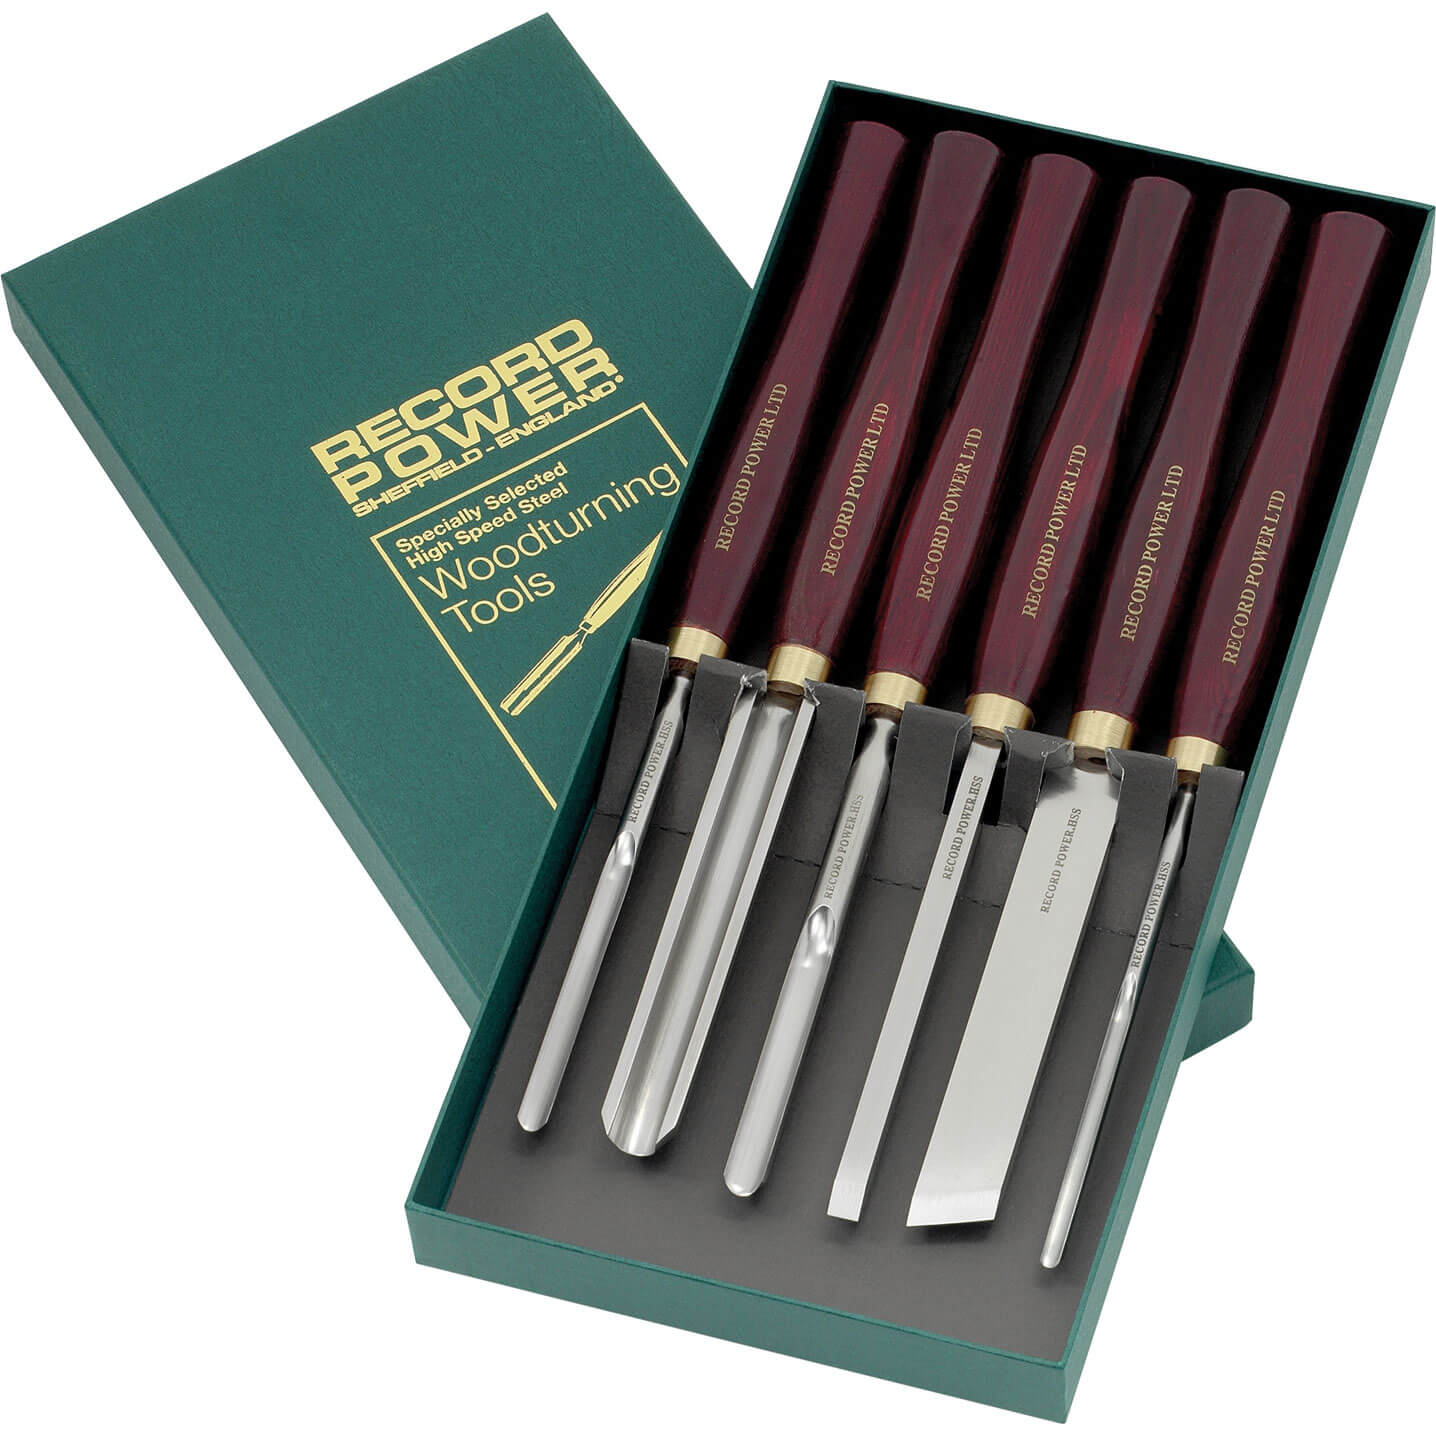 Record Power 6 Piece HSS Wood Turning Tool Spindle Set